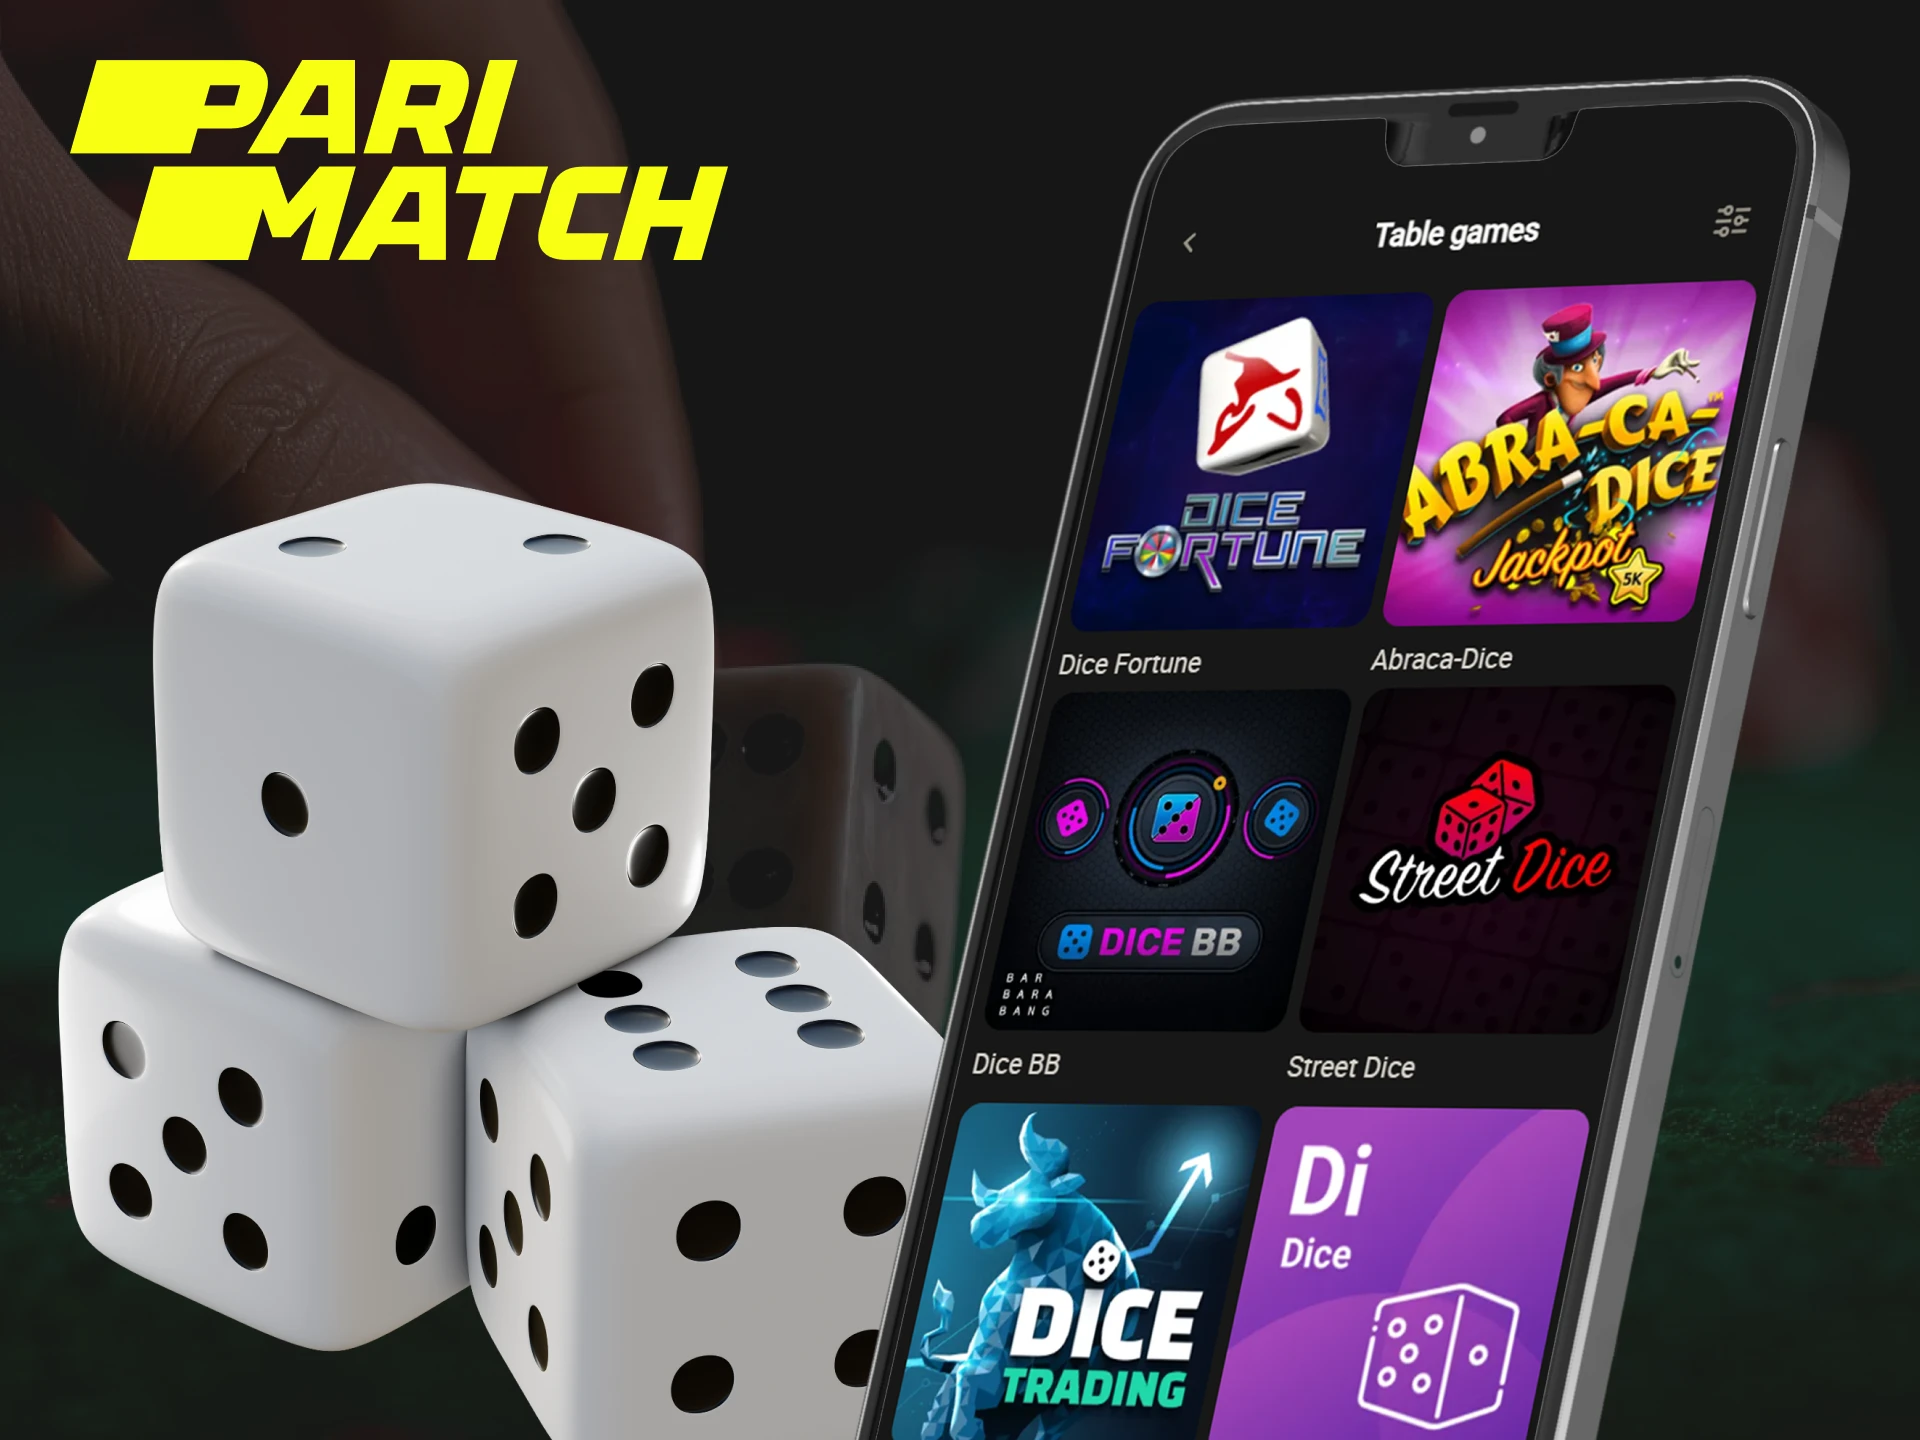 The Parimatch app has a variety of different dice games that you can play.